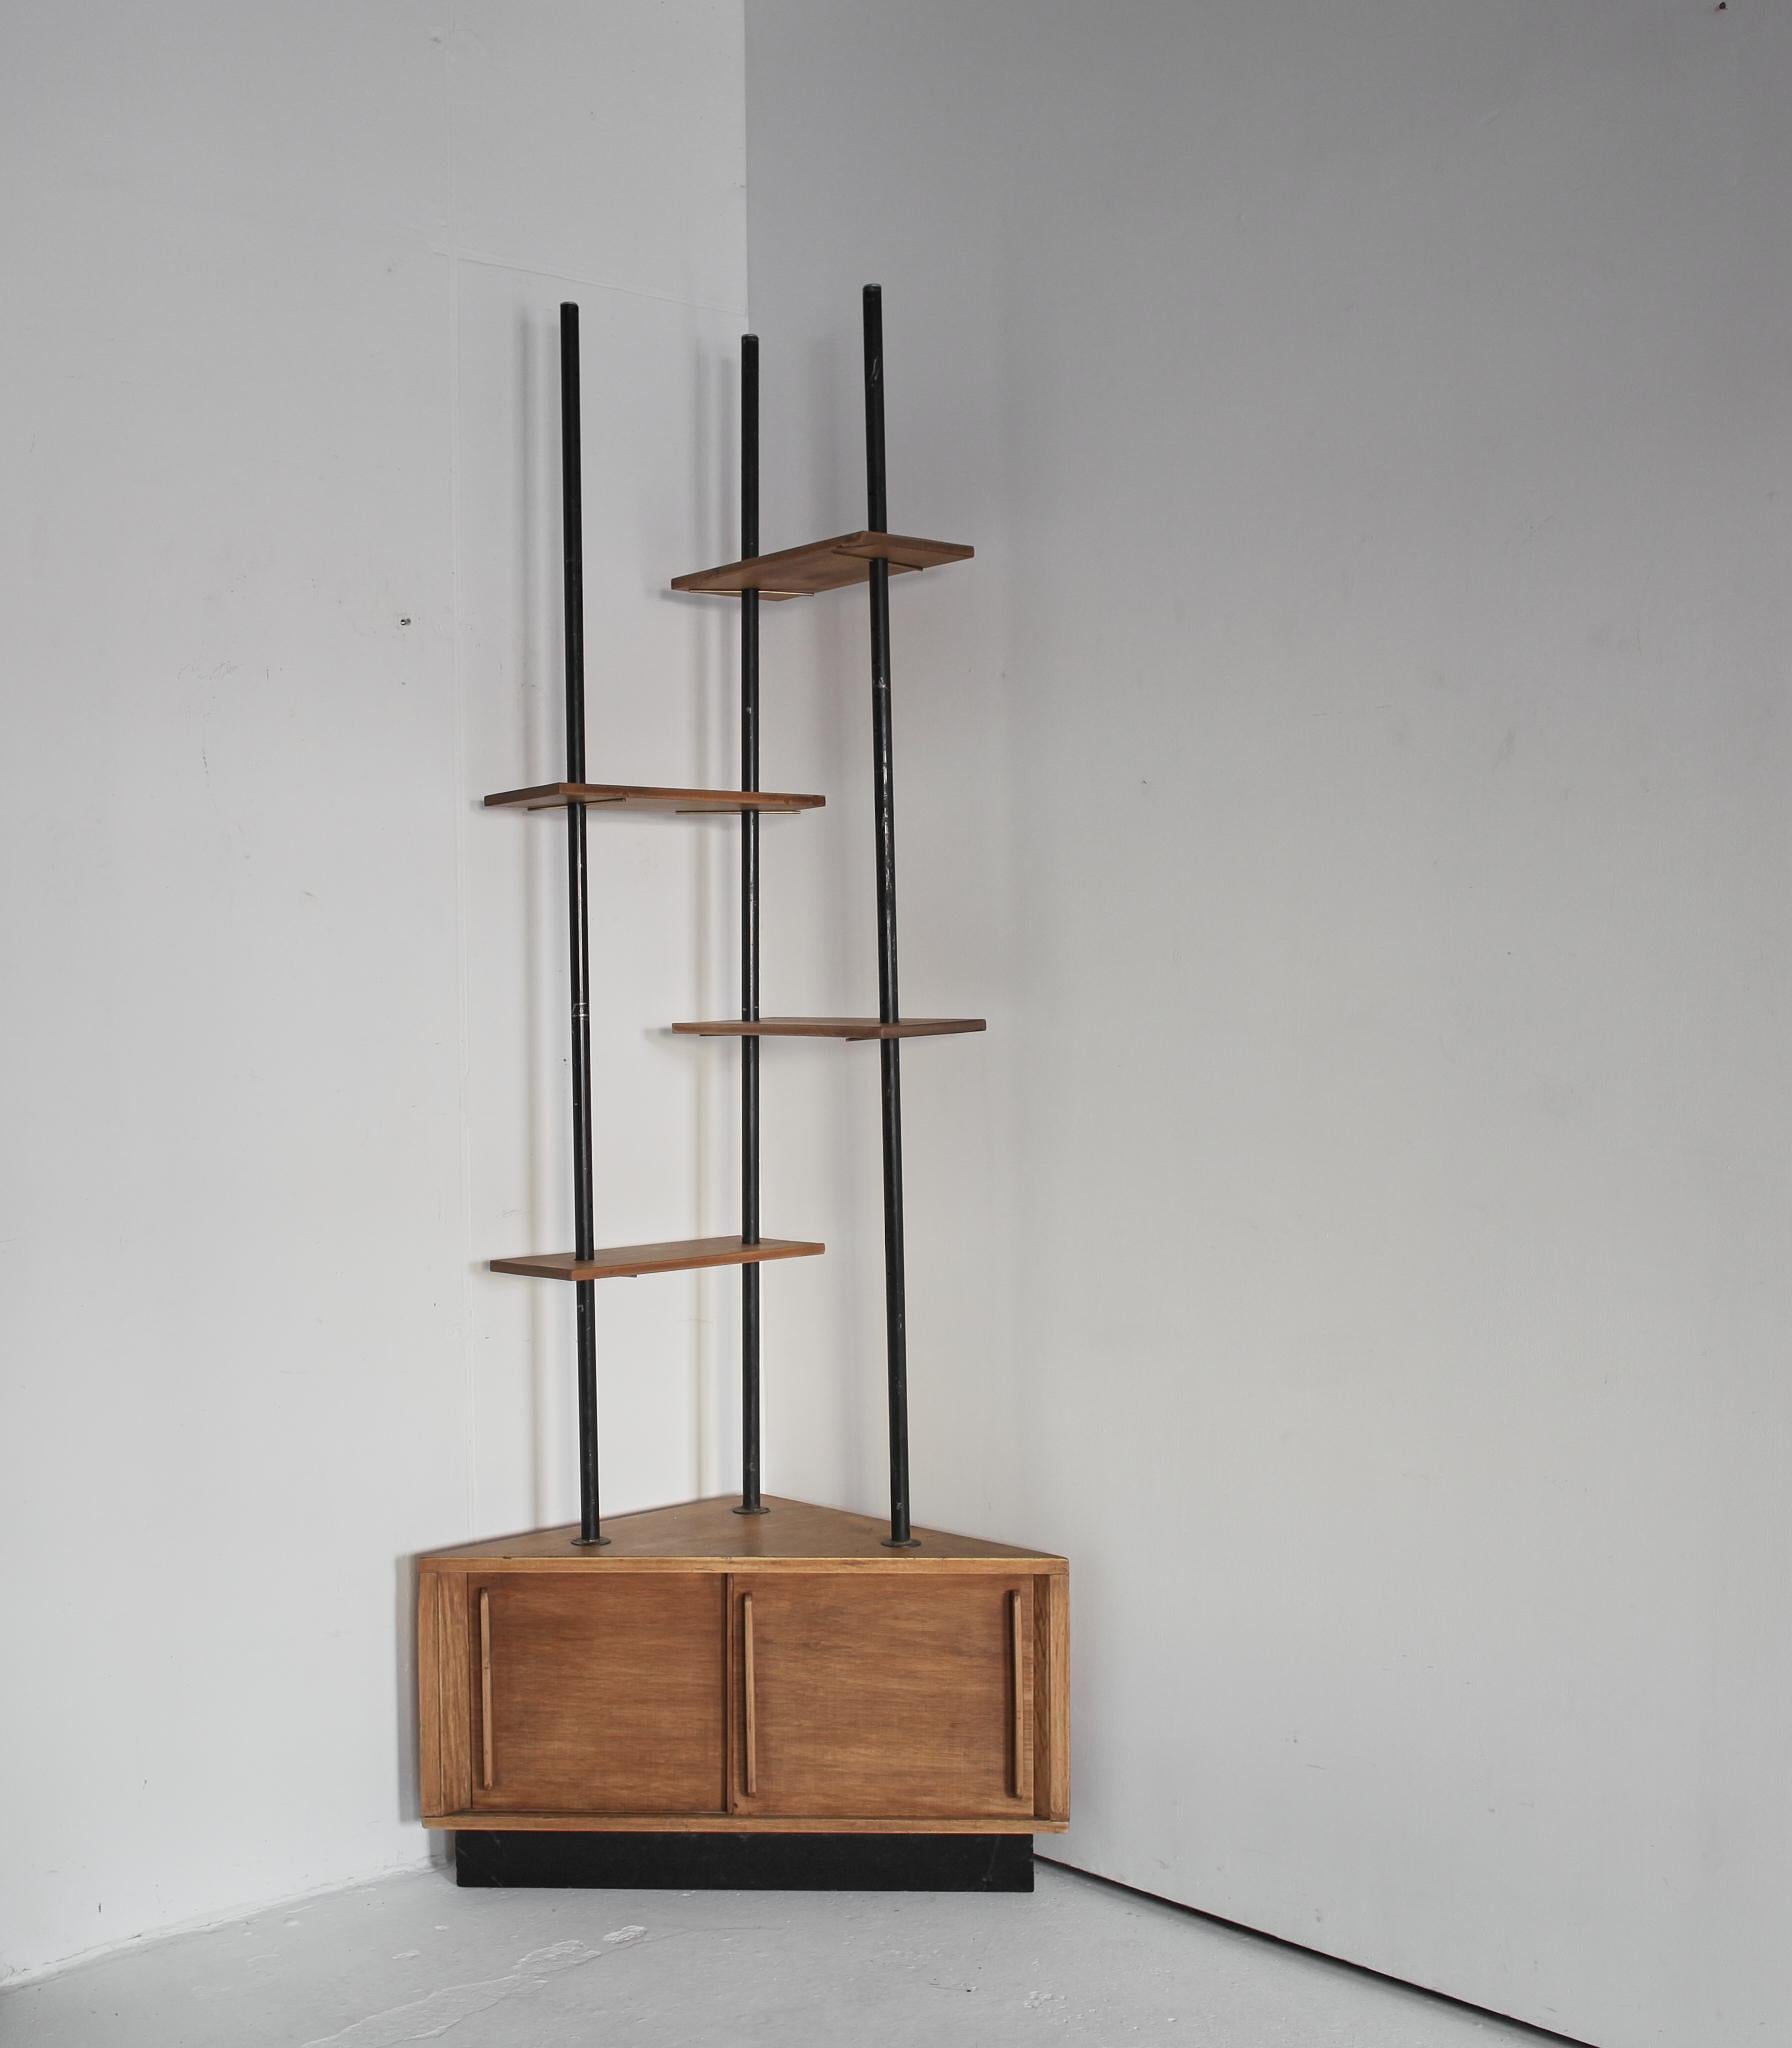 A French modernist corner cabinet/shelving unit with four adjustable shelves.

The cabinet is oak veneered while the shelves are solid.